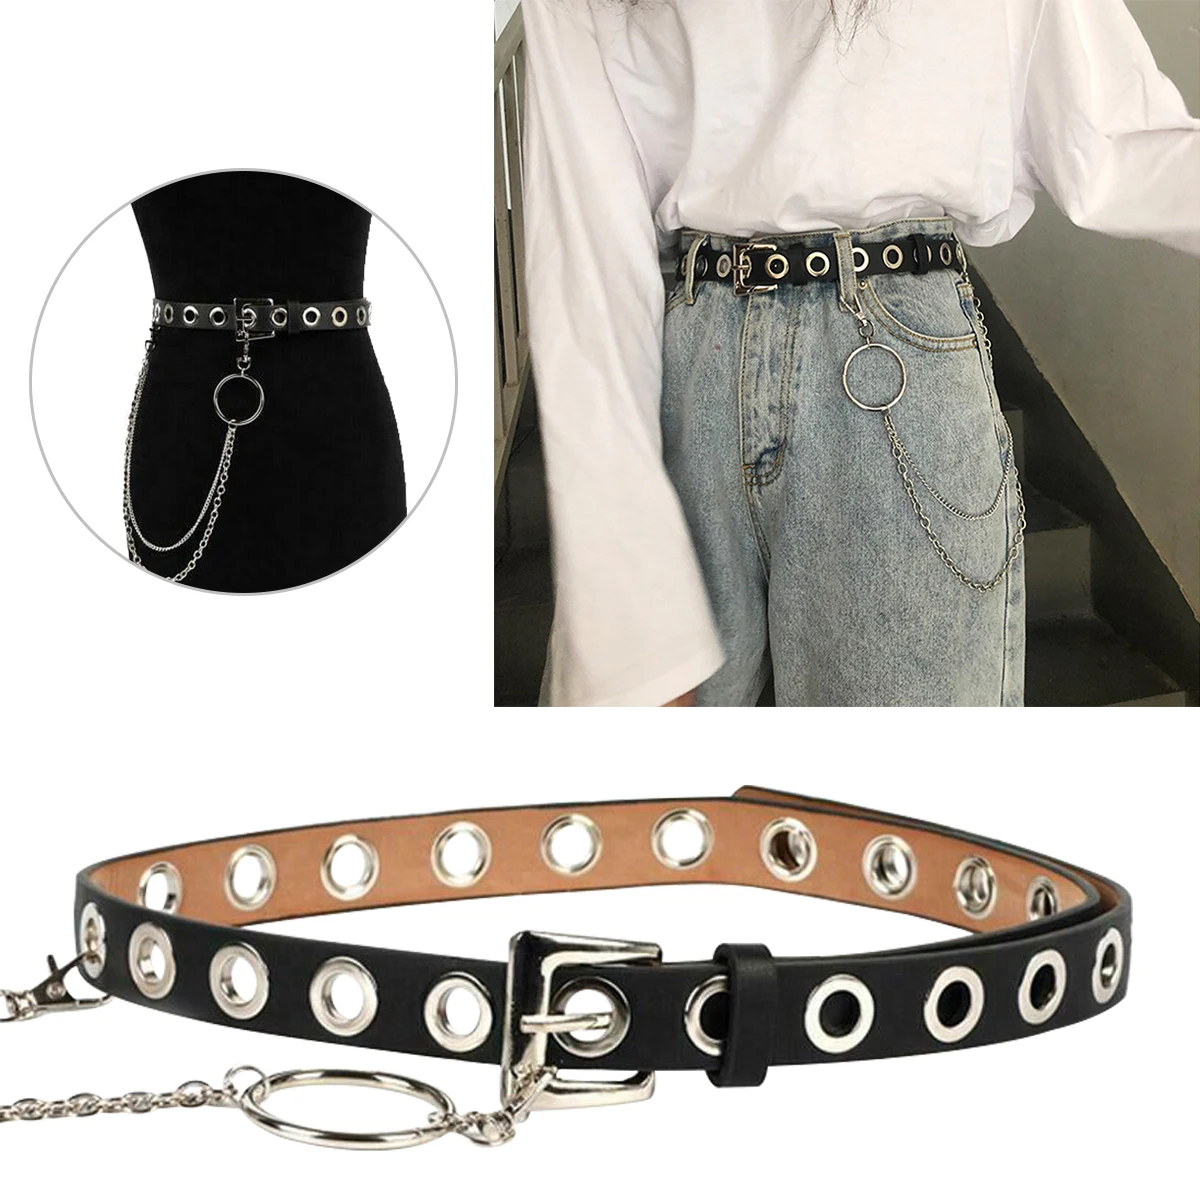 

2024 New Fashion Women Punk Chain Belt Adjustable Black Single Eyelet Grommet Metal Buckle PU Leather Lady Waistband For Jeans